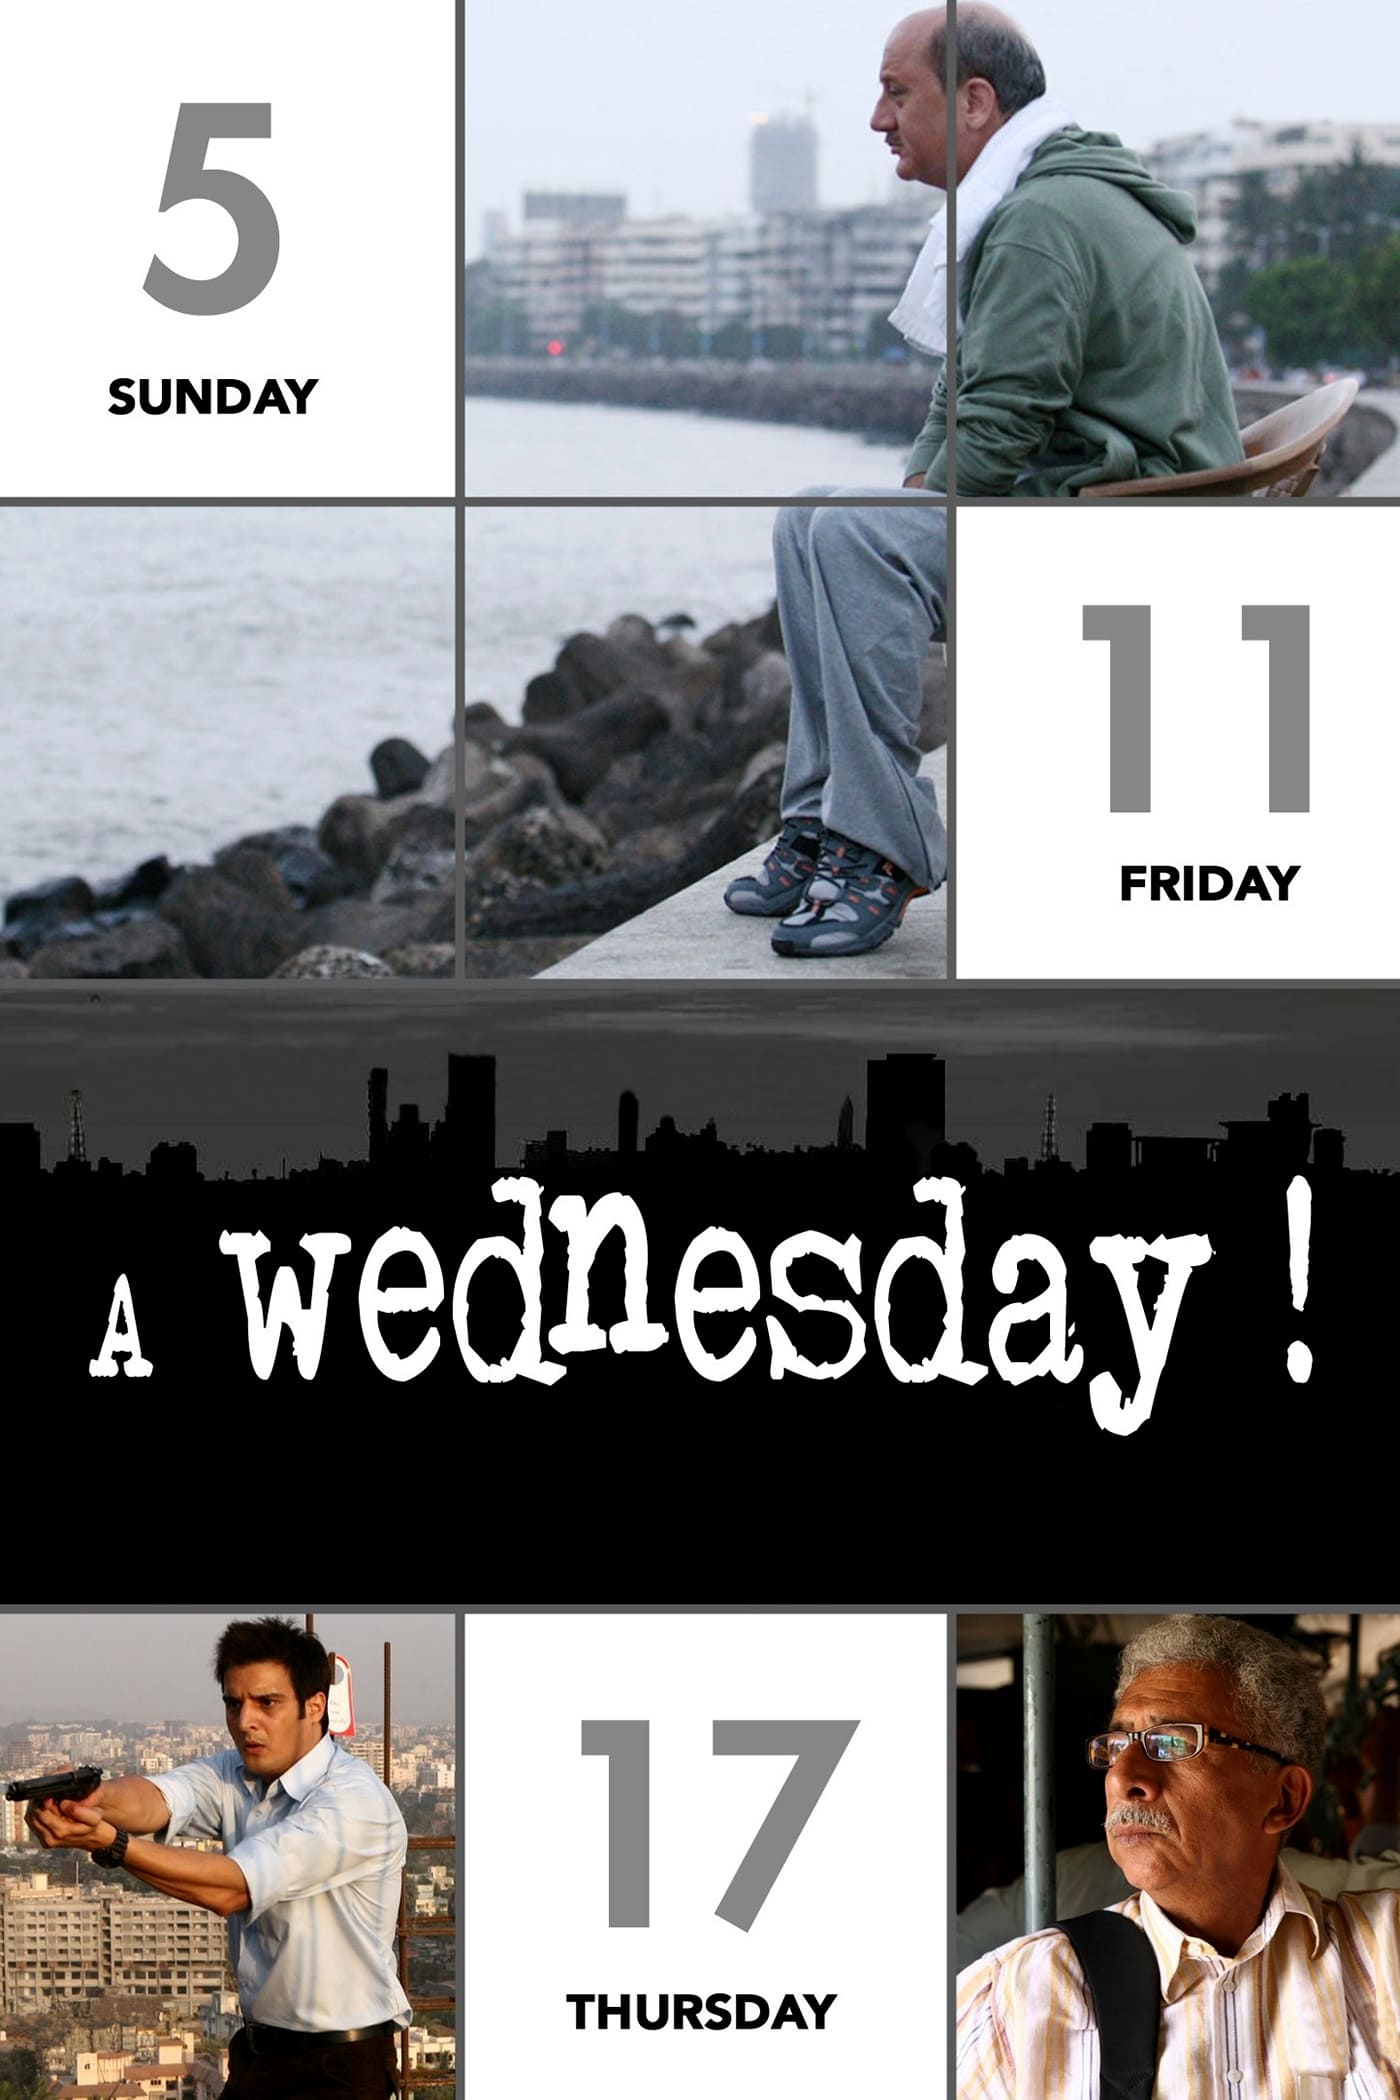 Poster for the movie "A Wednesday!"